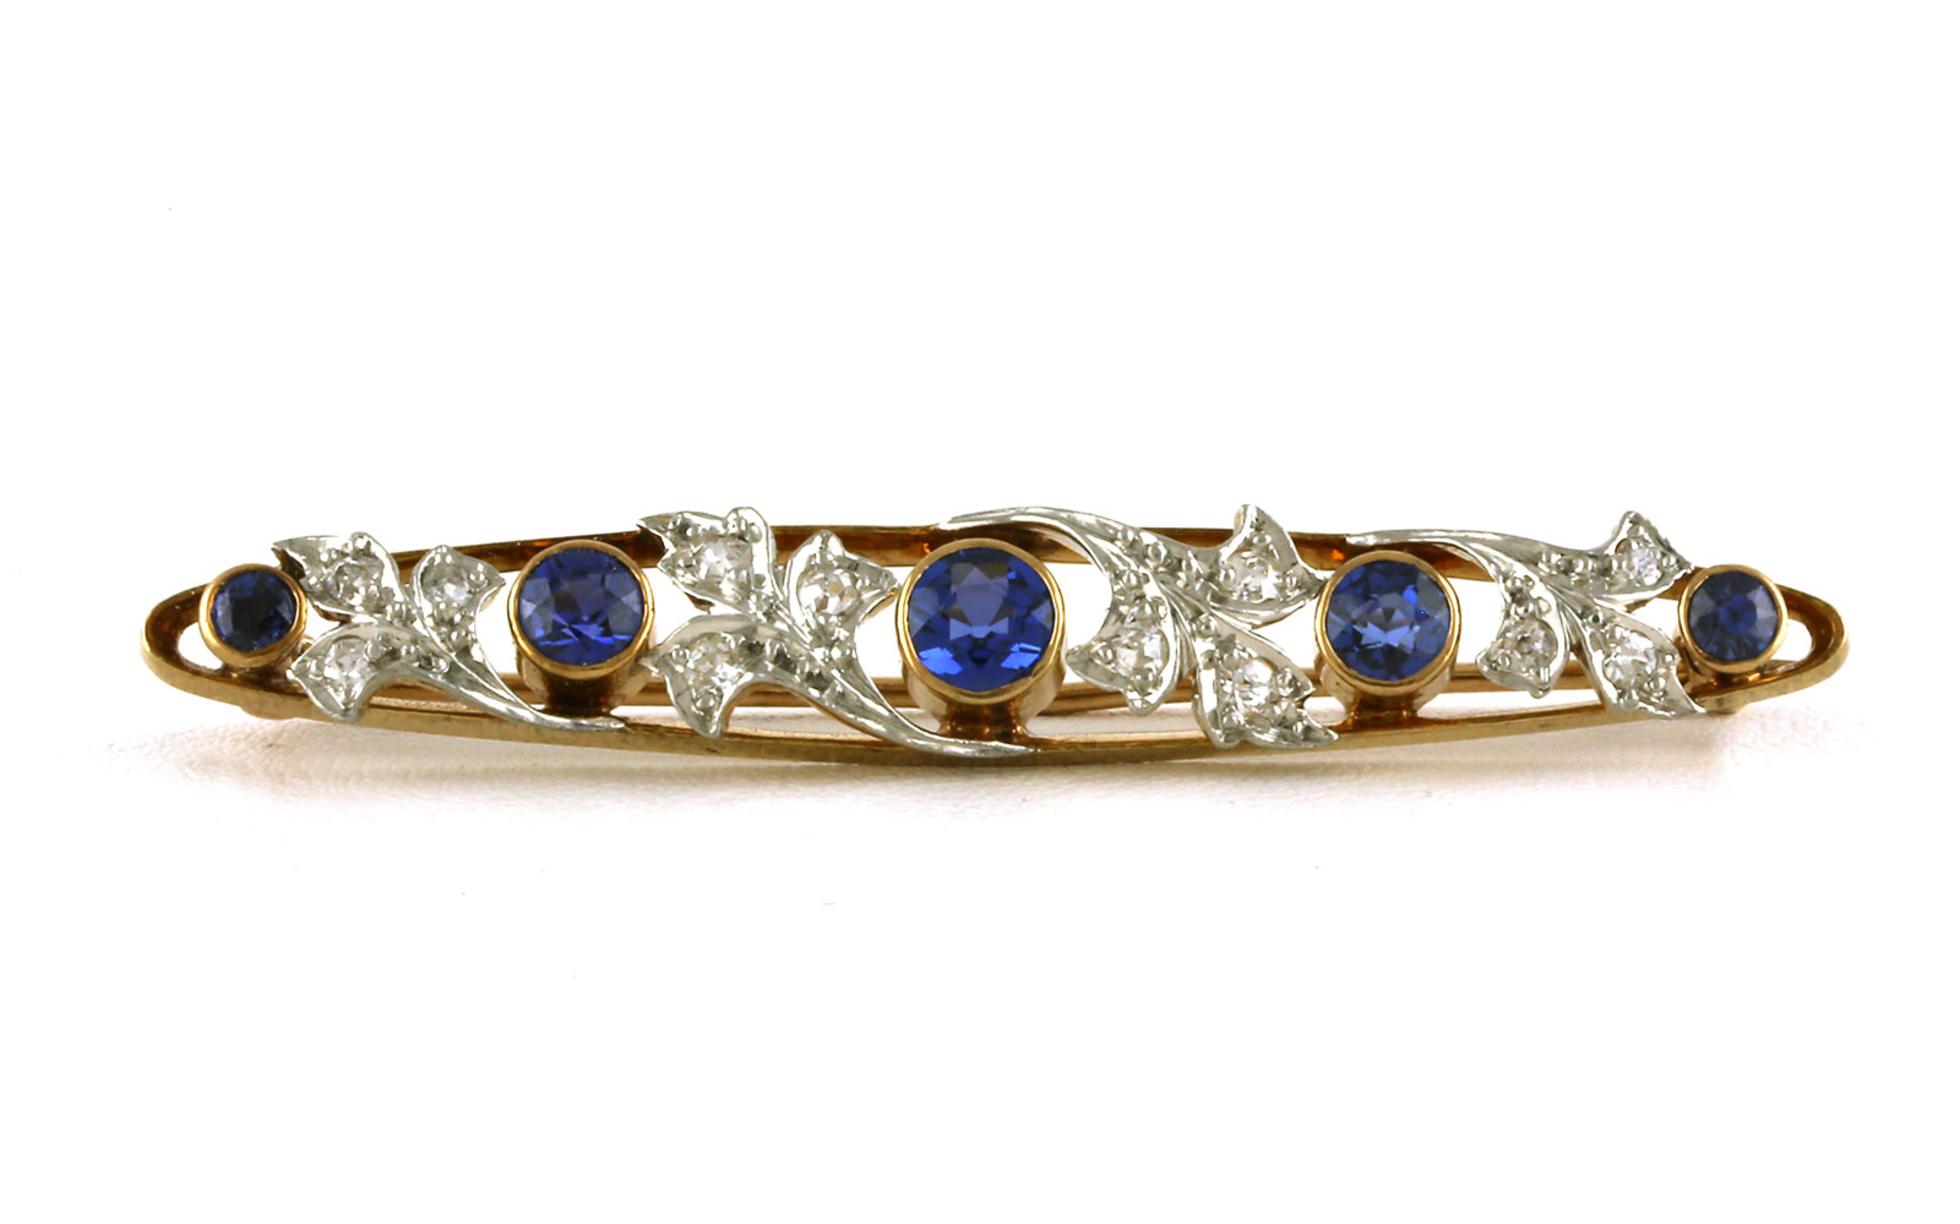 Estate Piece: Floral Design Bezel-set Montana Yogo Sapphire and Diamond Pin in Platinum and Yellow Gold (0.54cts TWT)